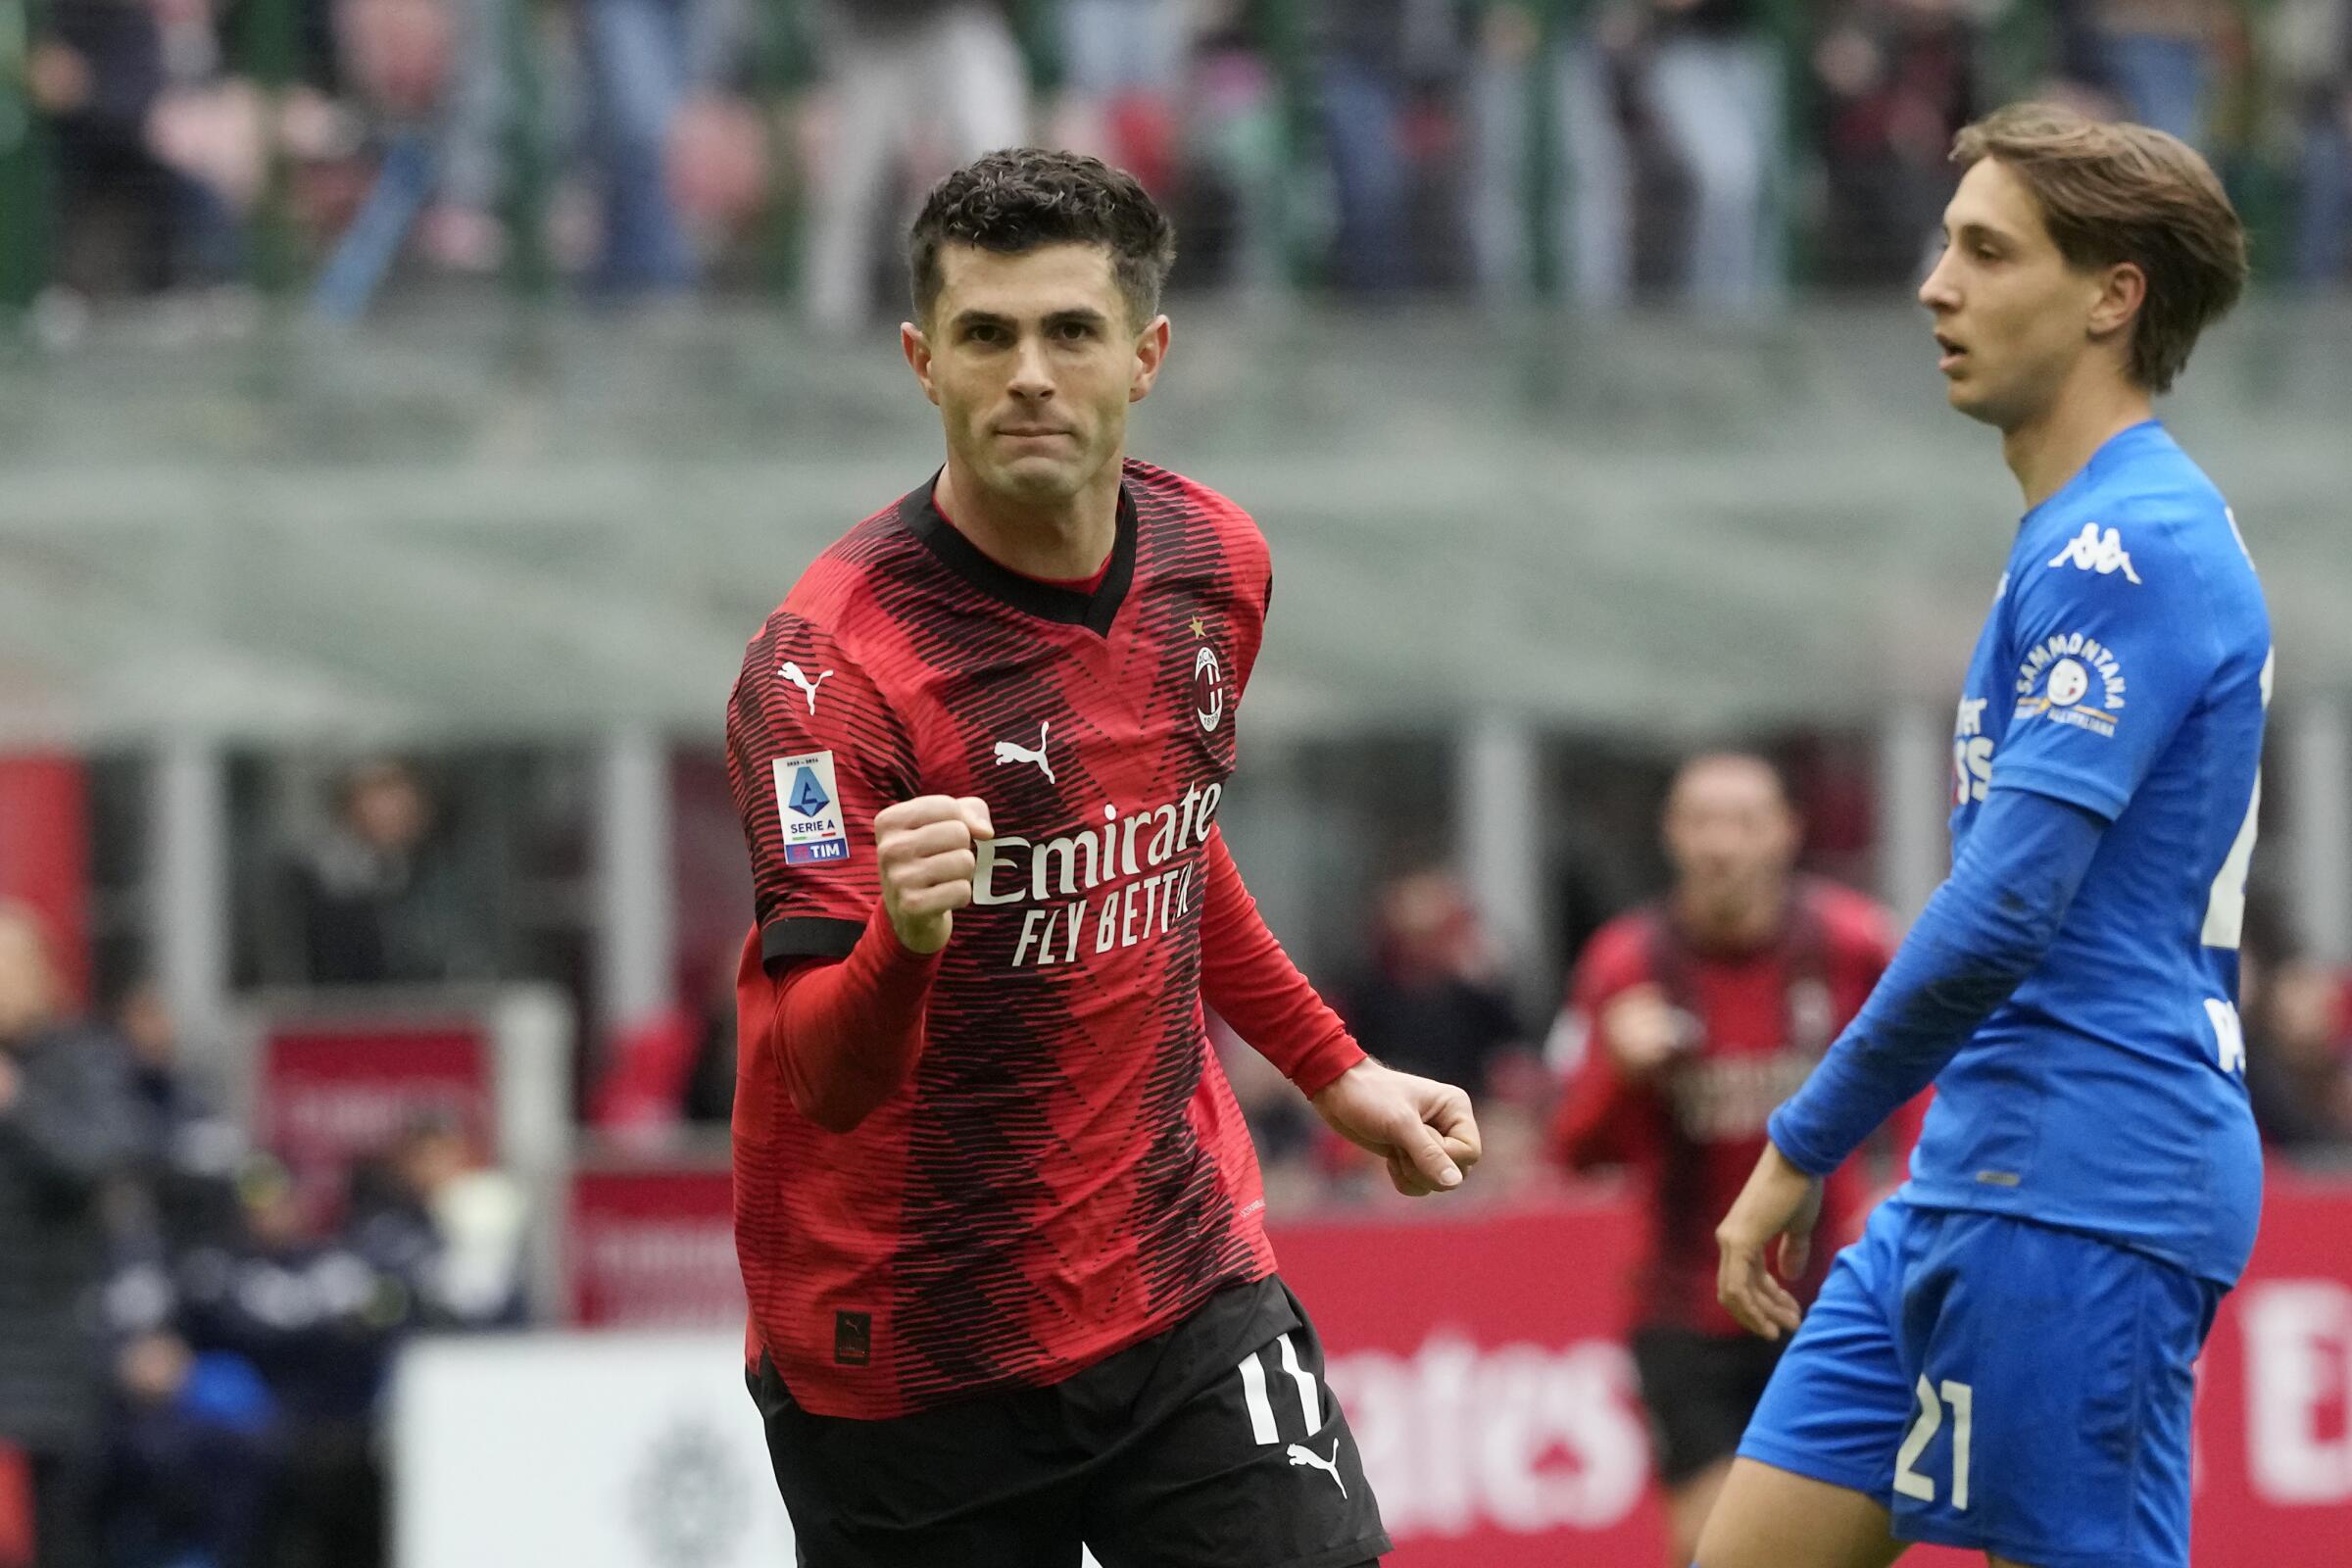 AC Milan's Christian Pulisic celebrates after scoring against Empoli in a Serie A match on March 10.